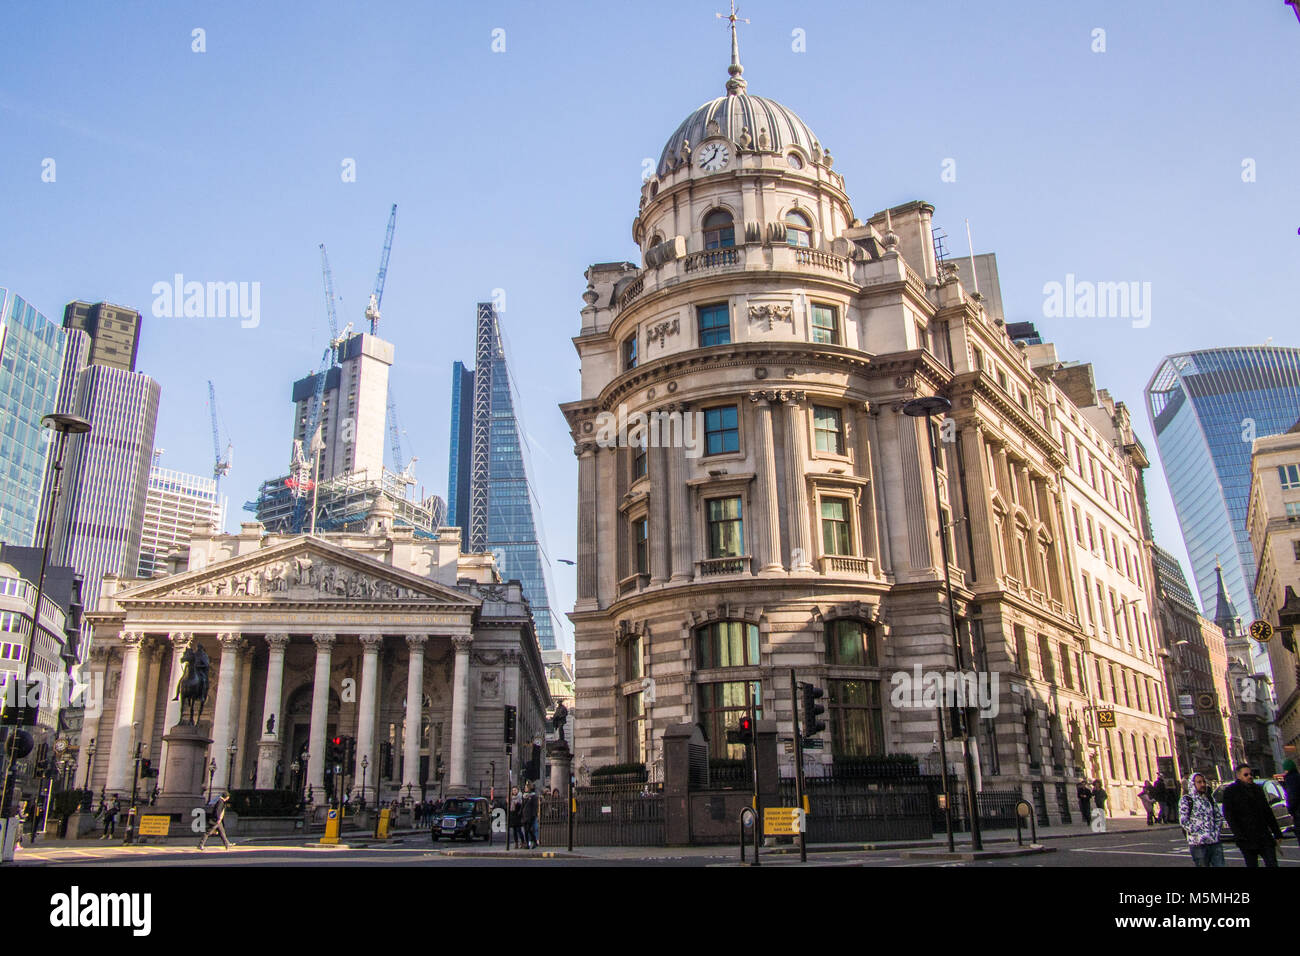 Royal Exchange (left) shopping centre with the famous sky scrapers of the 'Cheese Grater' (mid left) and 'Walkie Talkie' (Extreme right). London. Stock Photo